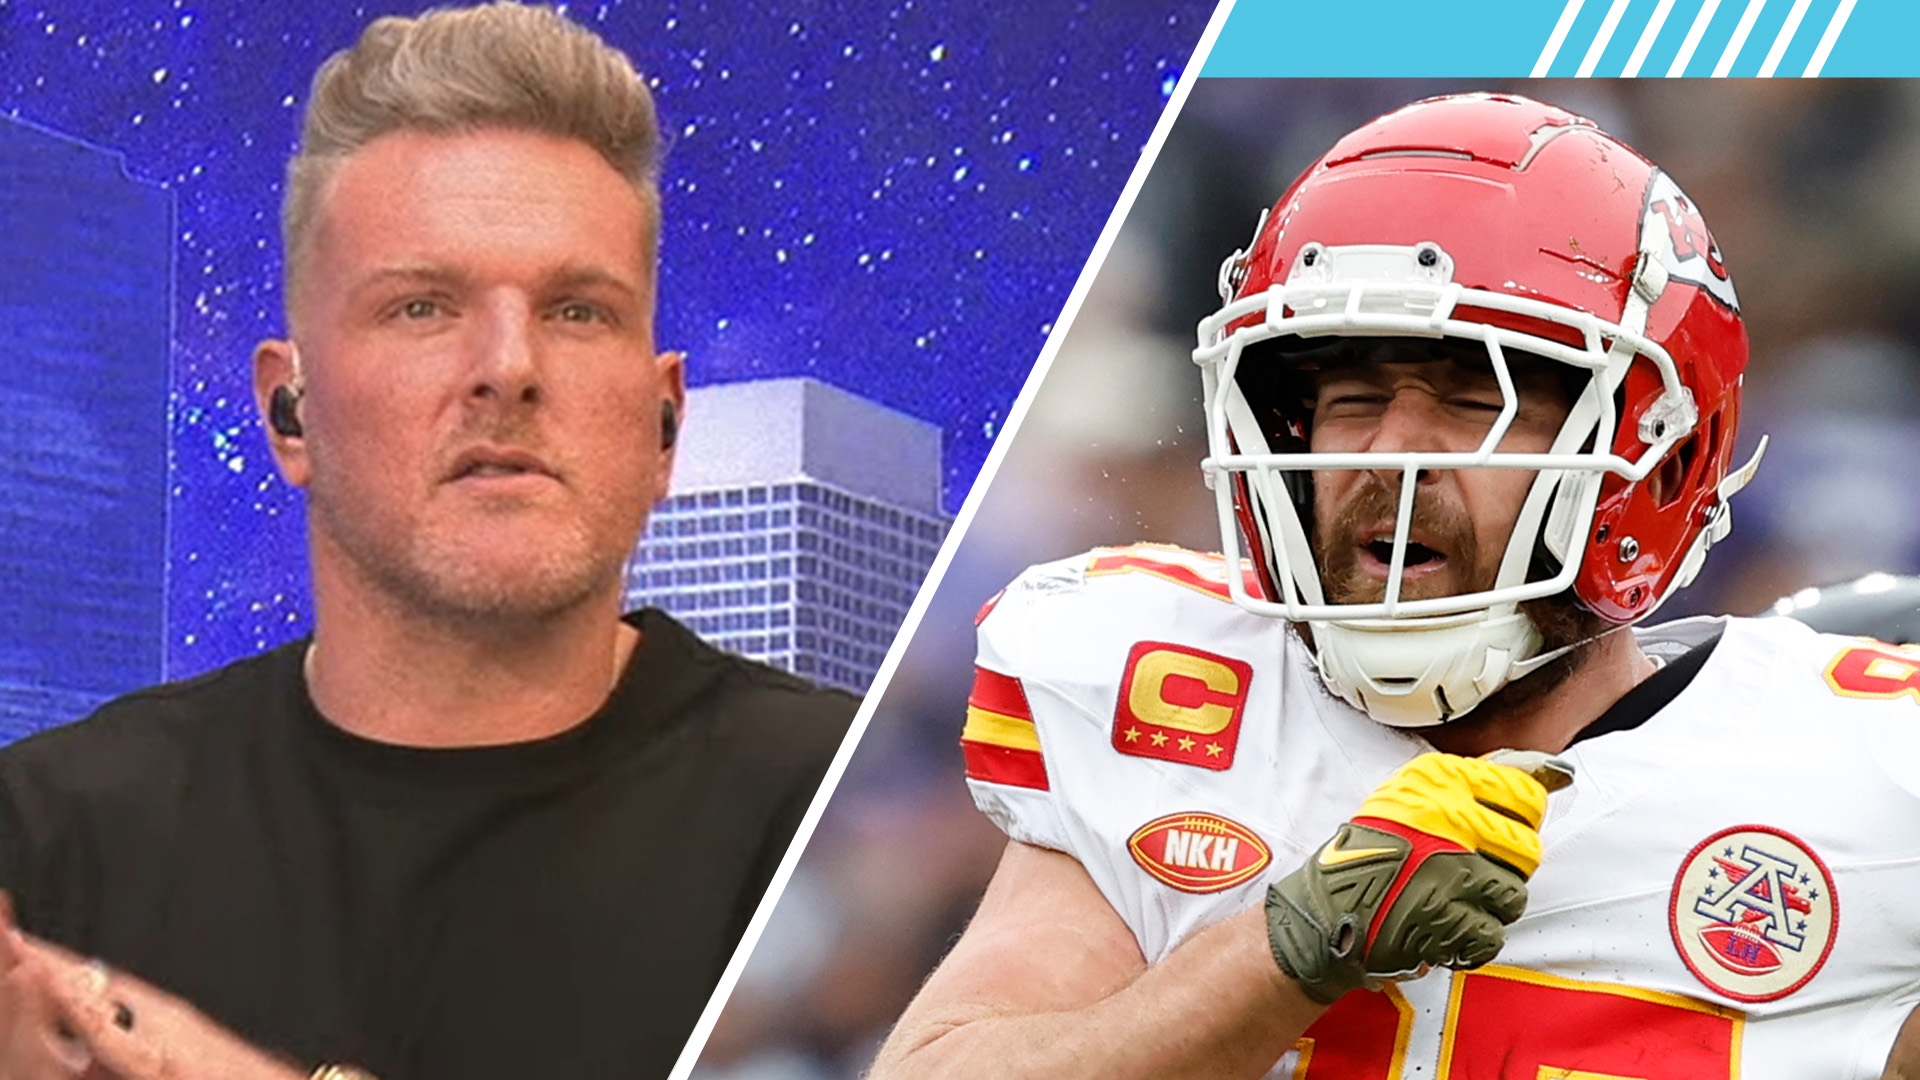 McAfee applauds Travis Kelce's contract extension with the Chiefs